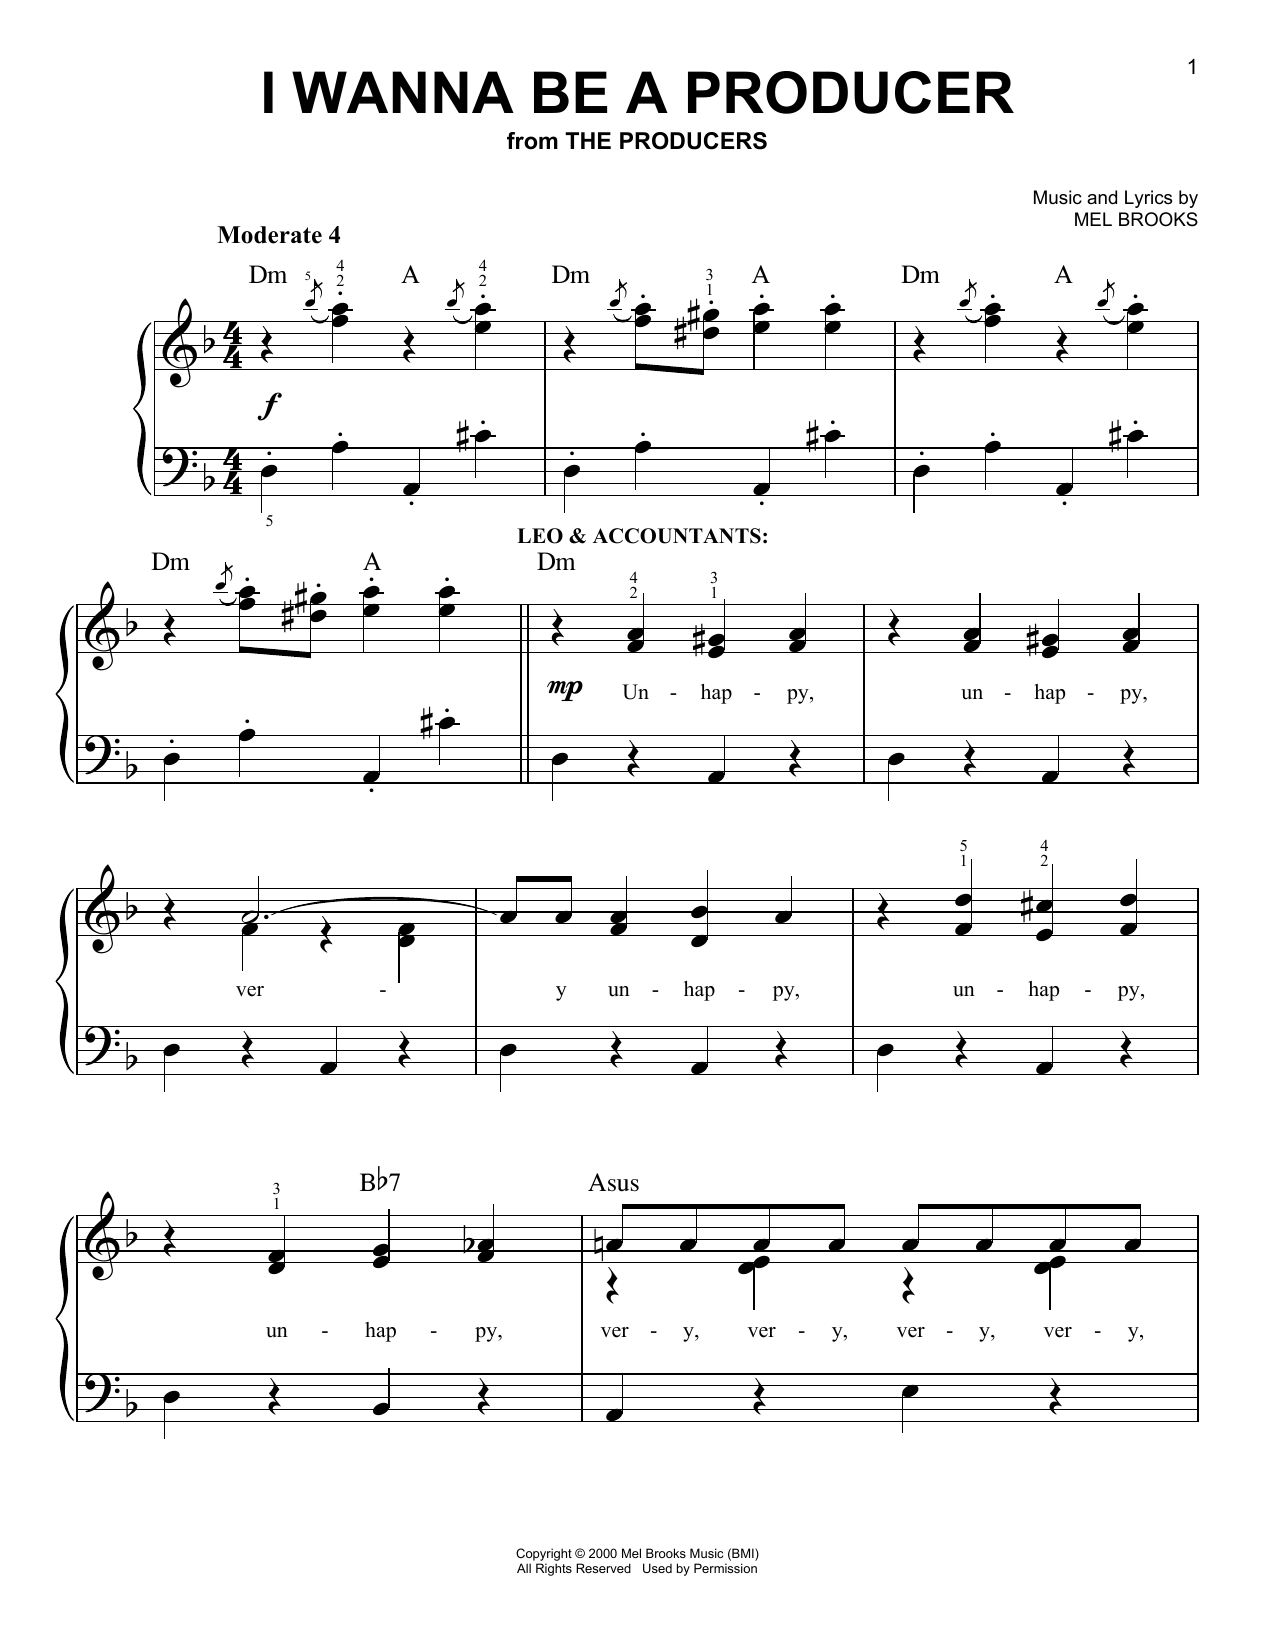 Mel Brooks I Wanna Be A Producer sheet music notes and chords. Download Printable PDF.